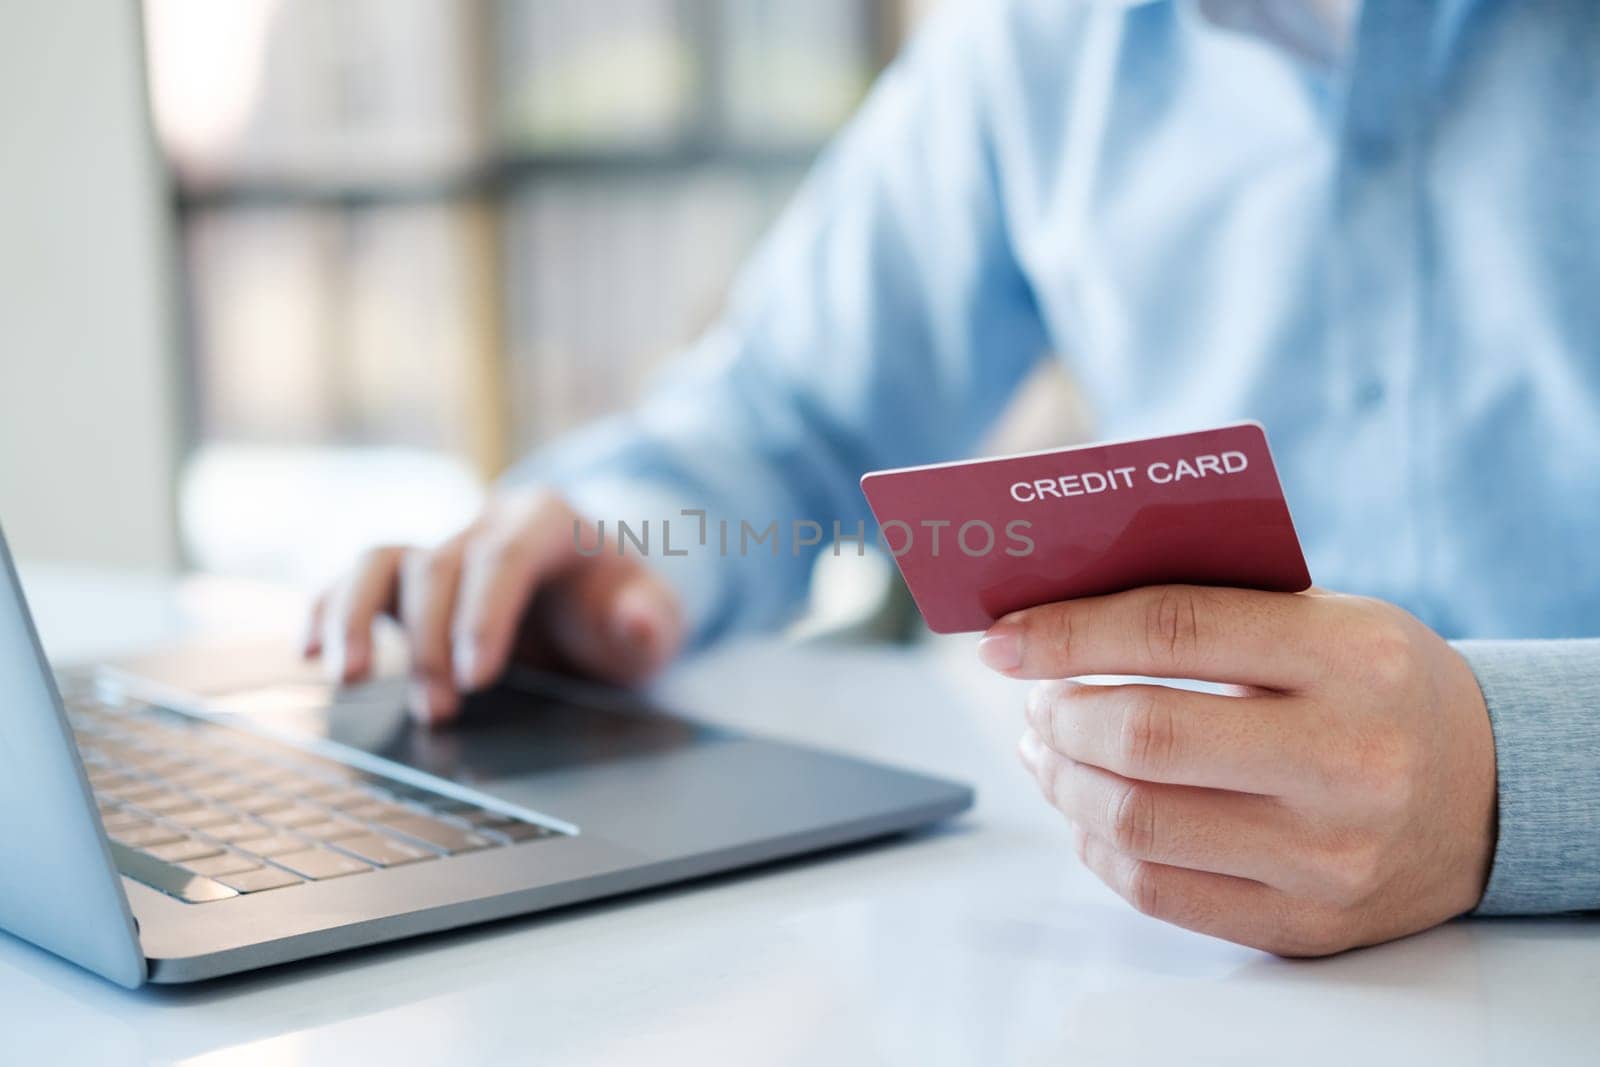 A man is using a laptop to pay for something with a red credit card. Concept of convenience and ease, as the man is able to complete his transaction quickly and easily using his laptop